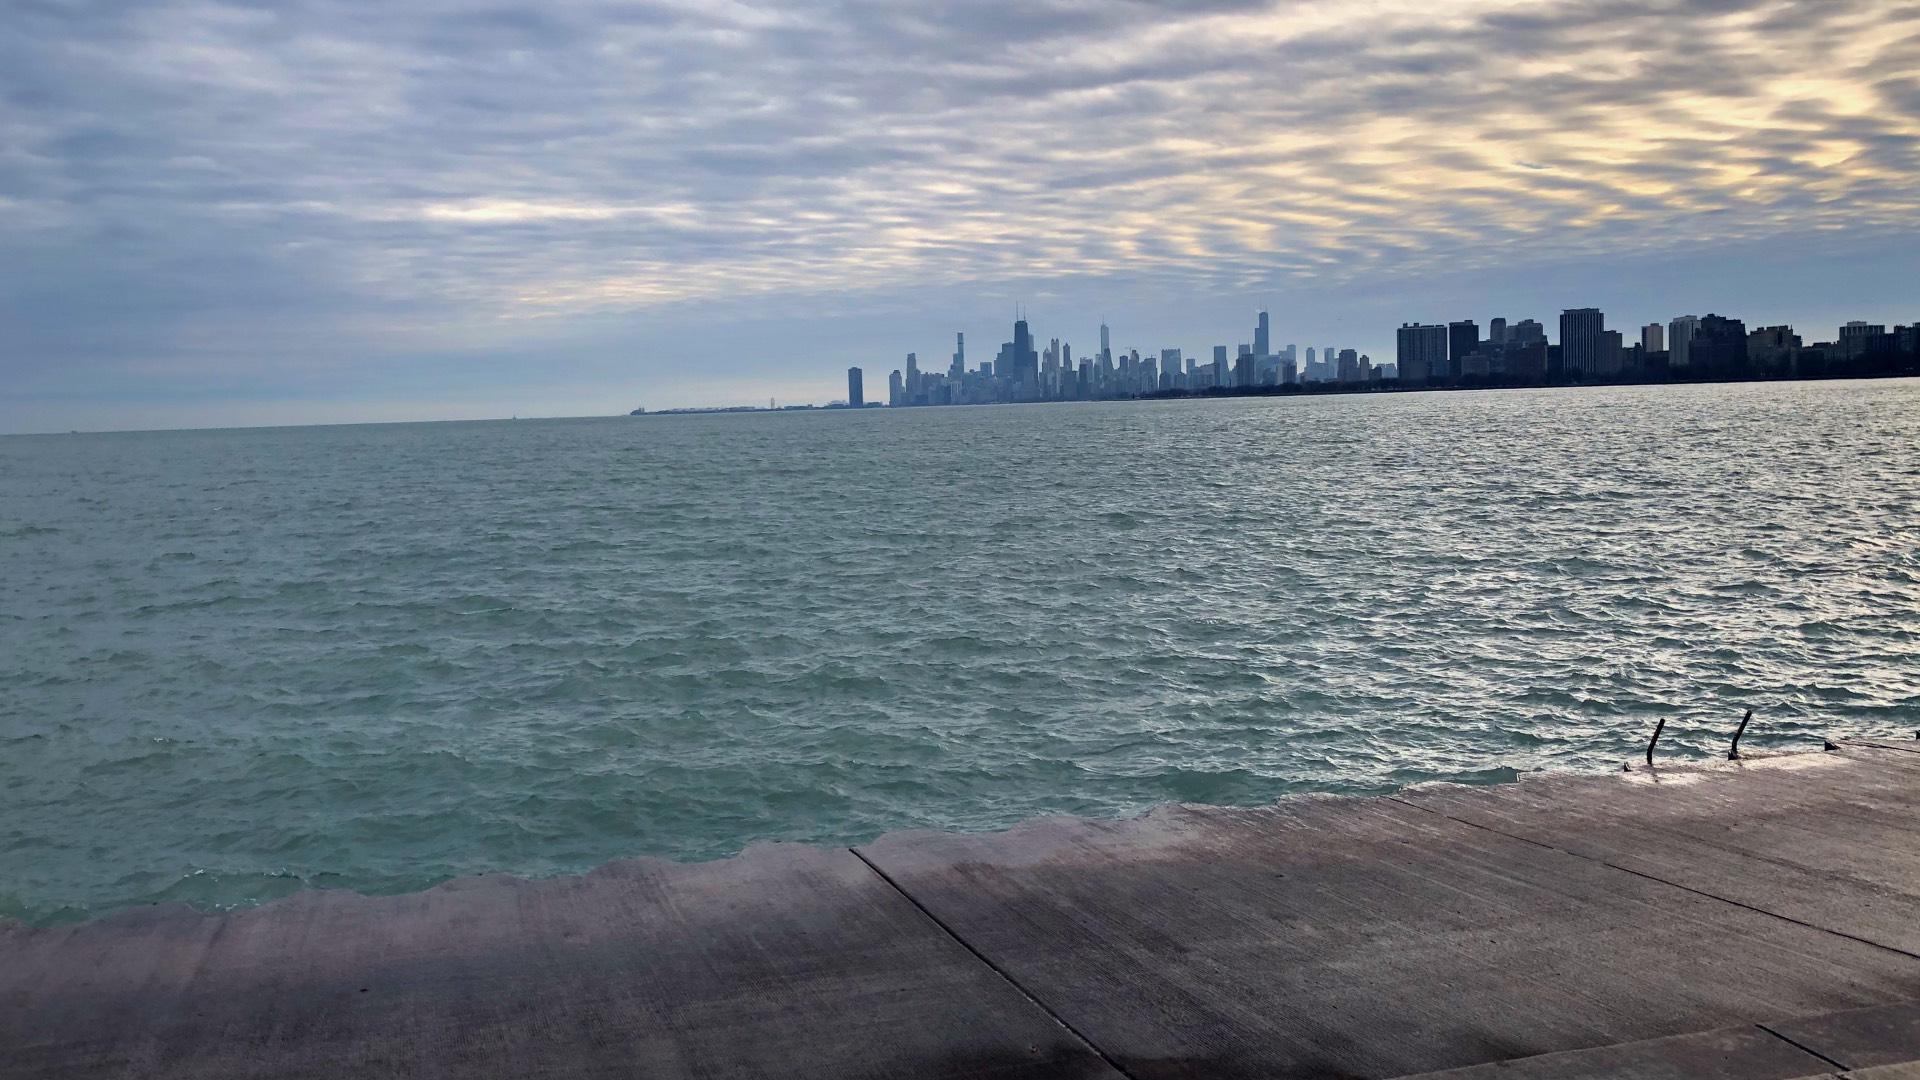 The view from Montrose Harbor is free, but soon the parking won't be. (Patty Wetli / WTTW News)